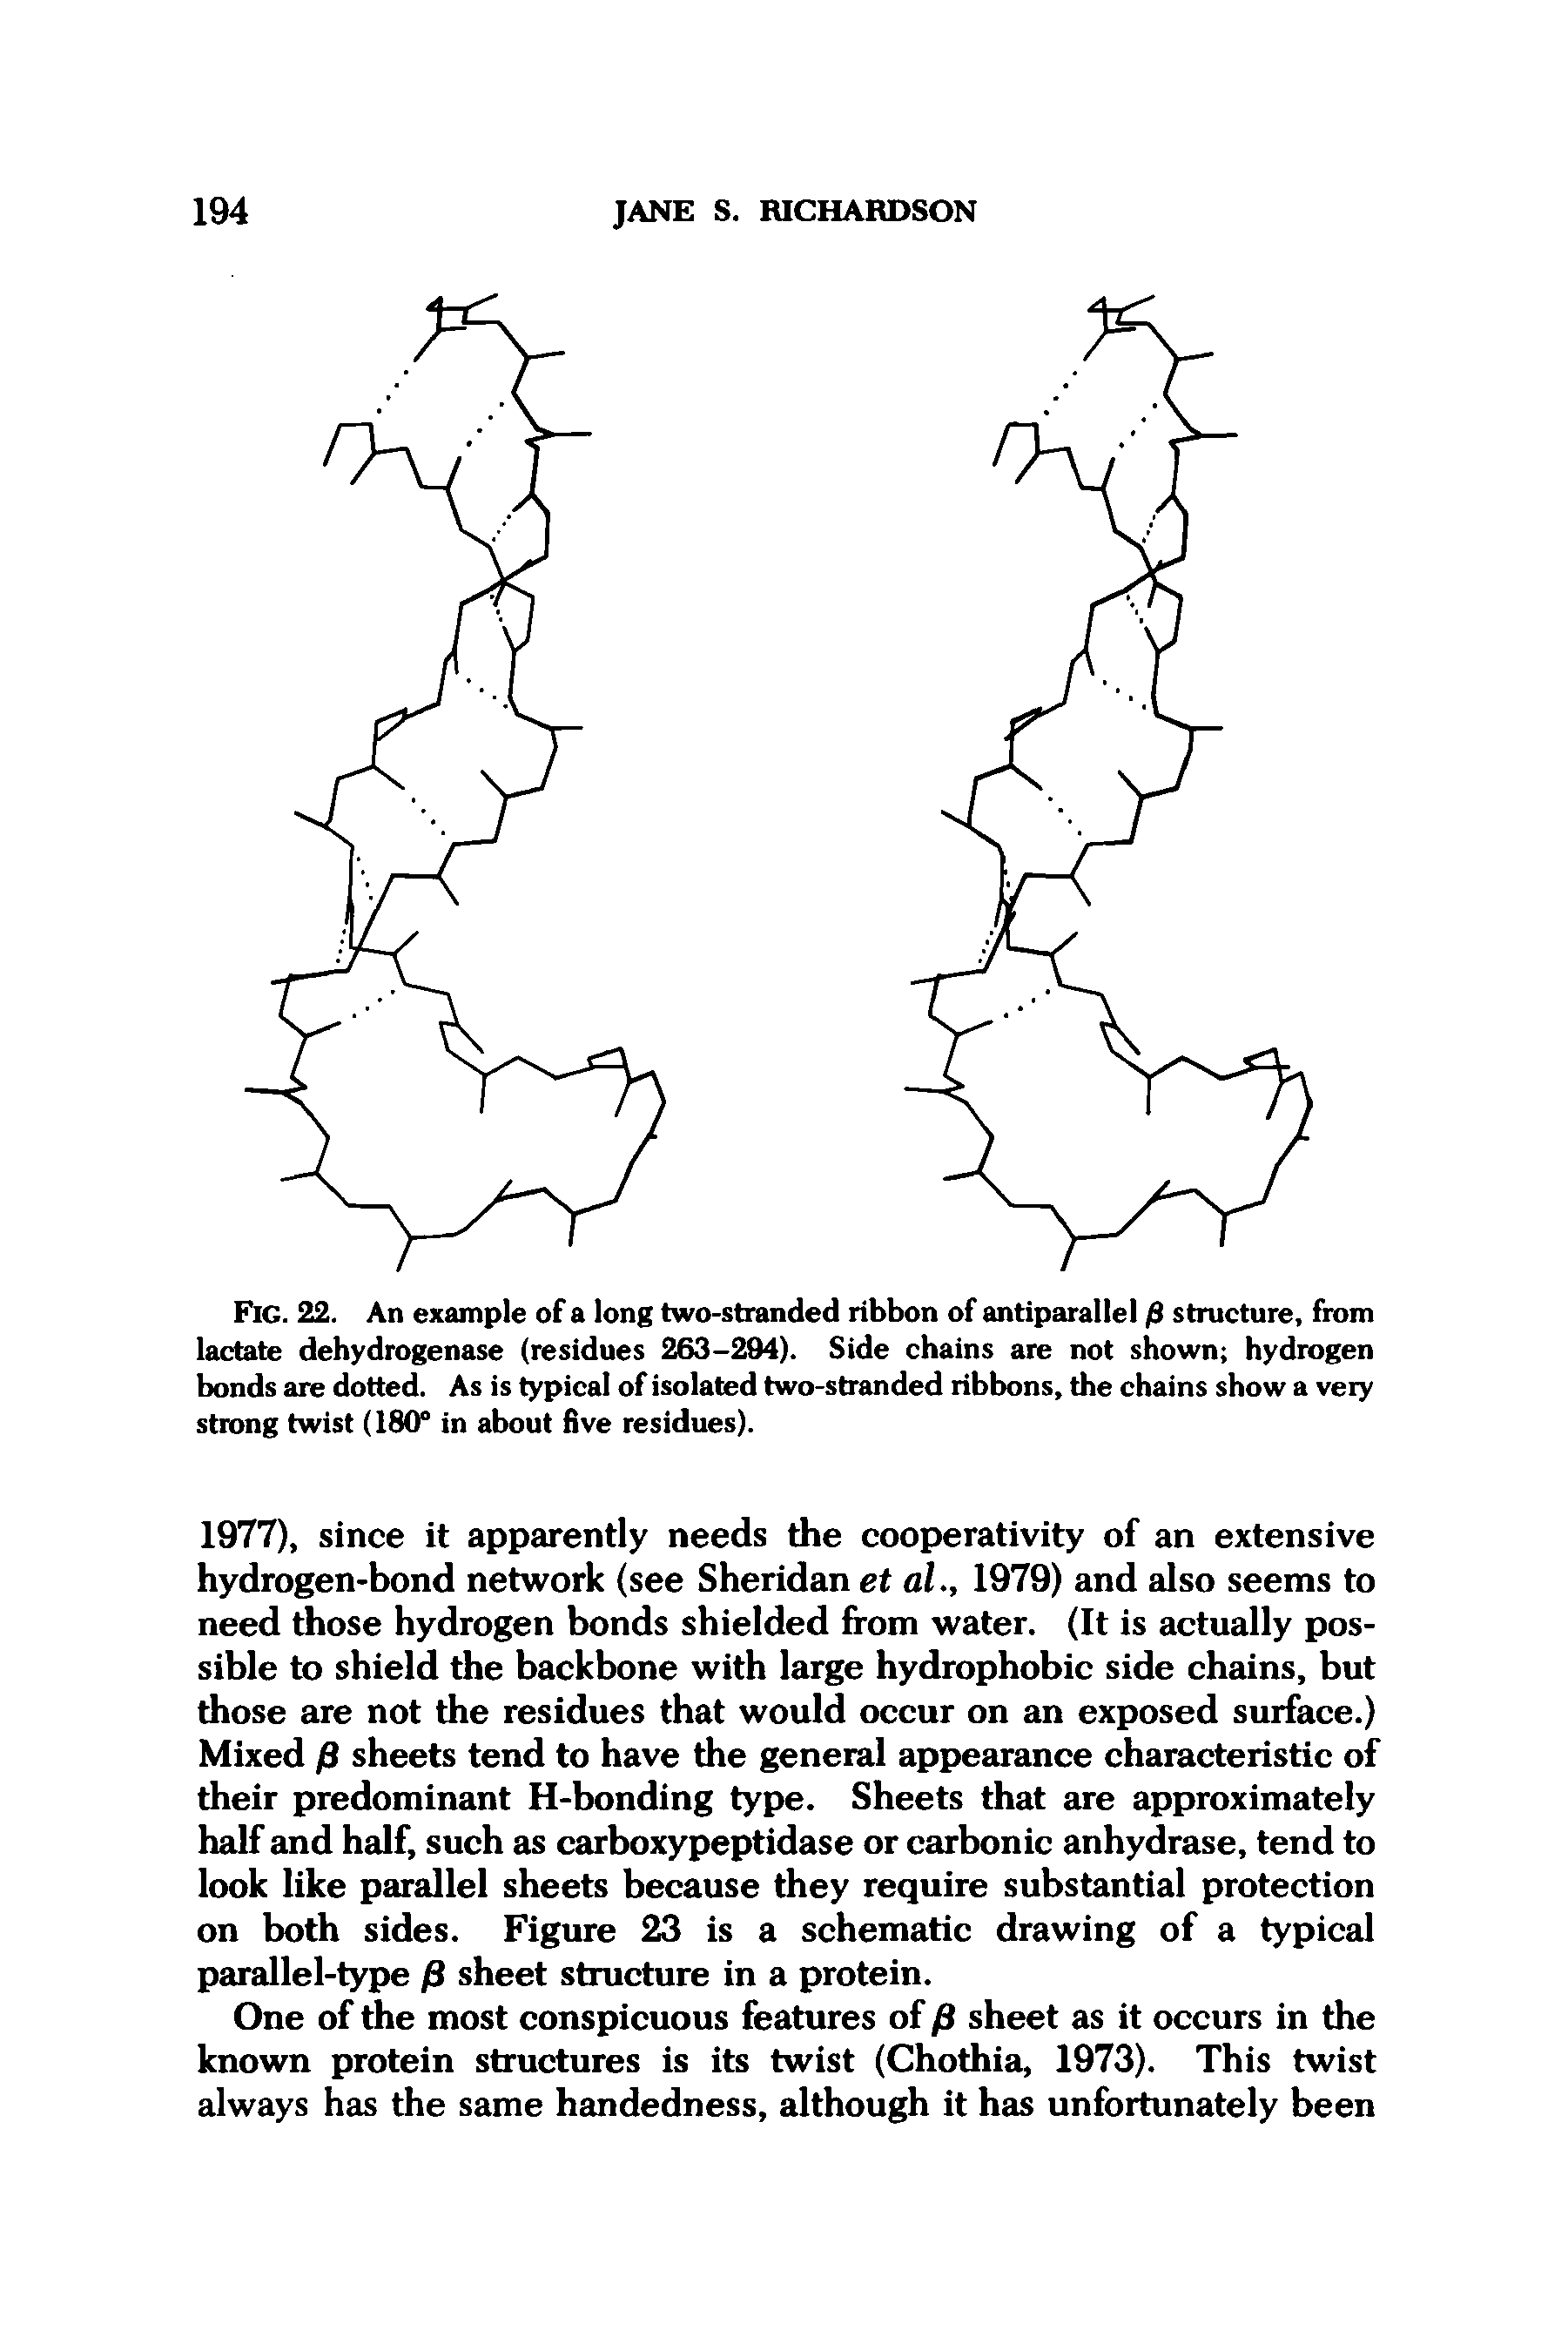 Fig. 22. An example of a long two-stranded ribbon of antiparallel jS structure, from lactate dehydrogenase (residues 263-294). Side chains are not shown hydrogen bonds are dotted. As is typical of isolated two-stranded ribbons, the chains show a very strong twist (180° in about five residues).